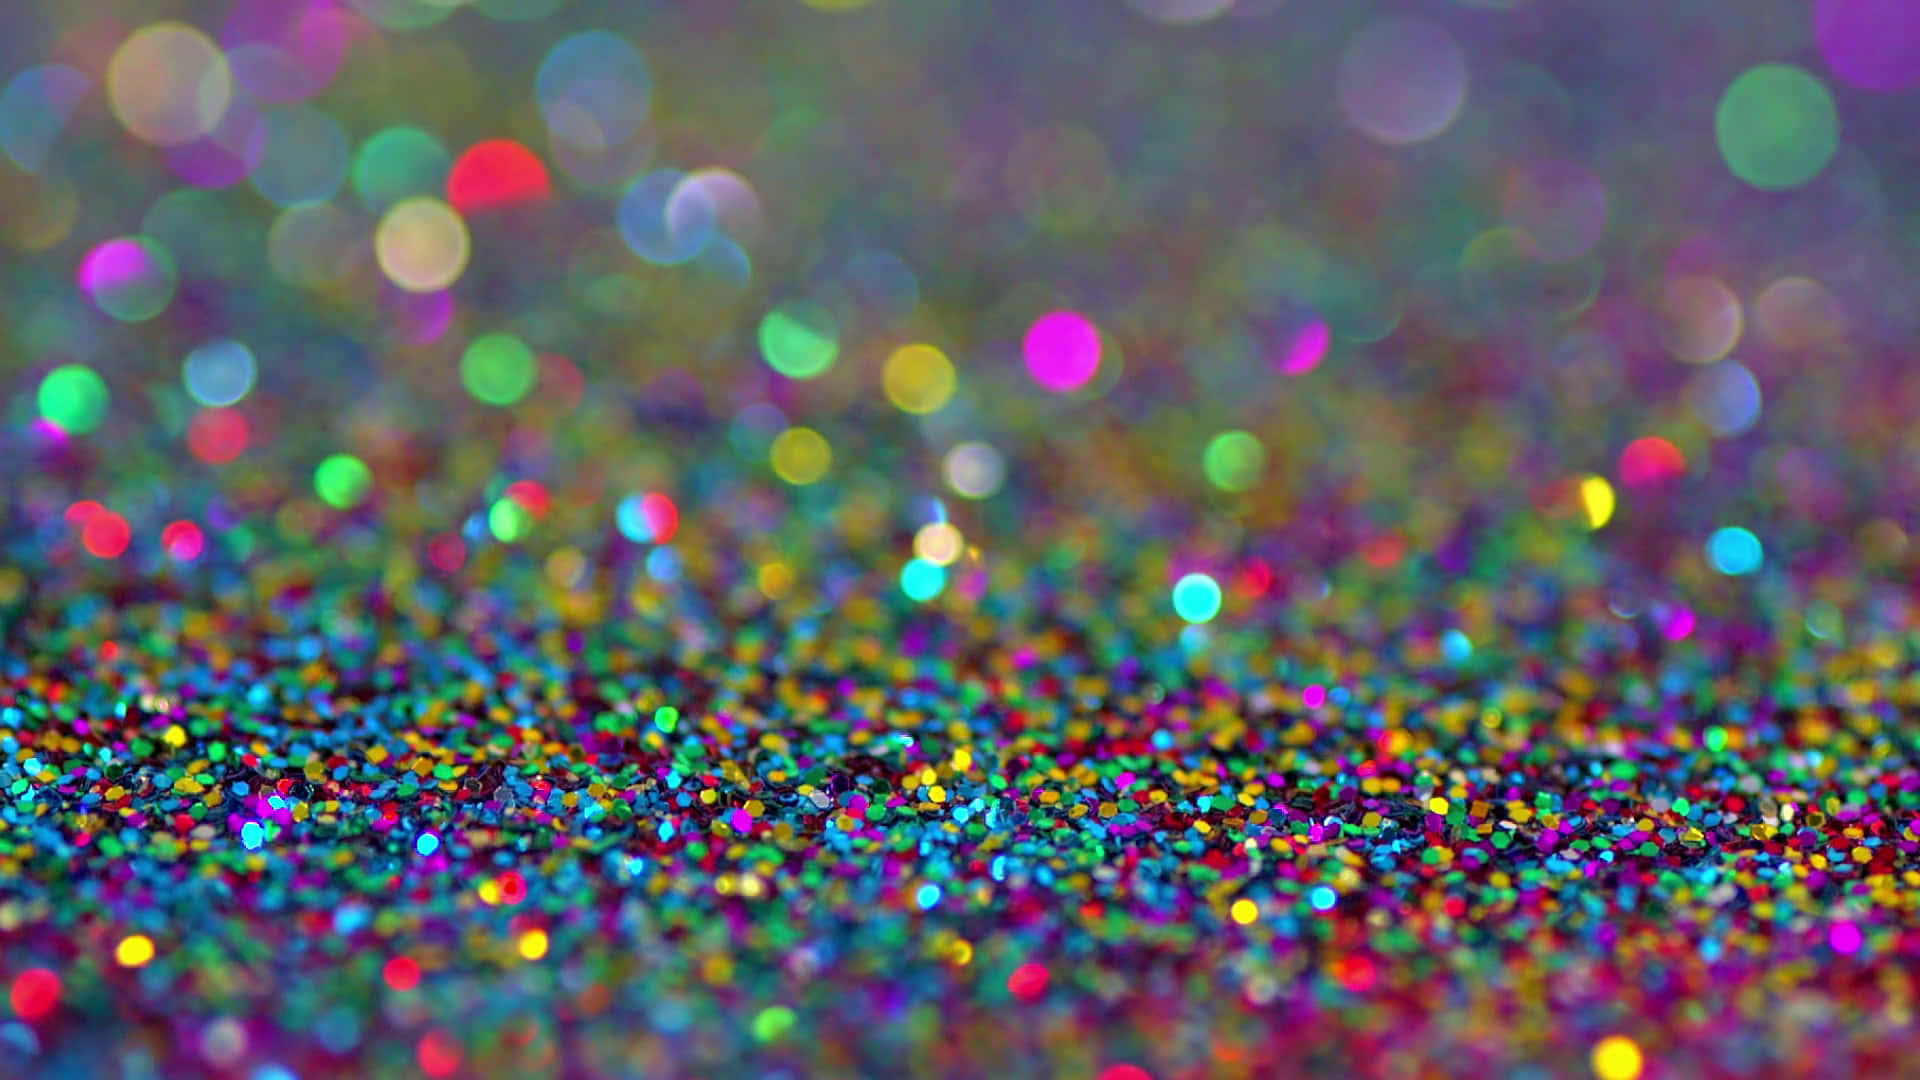 Beautiful sparkly background with a blend of purple and blue